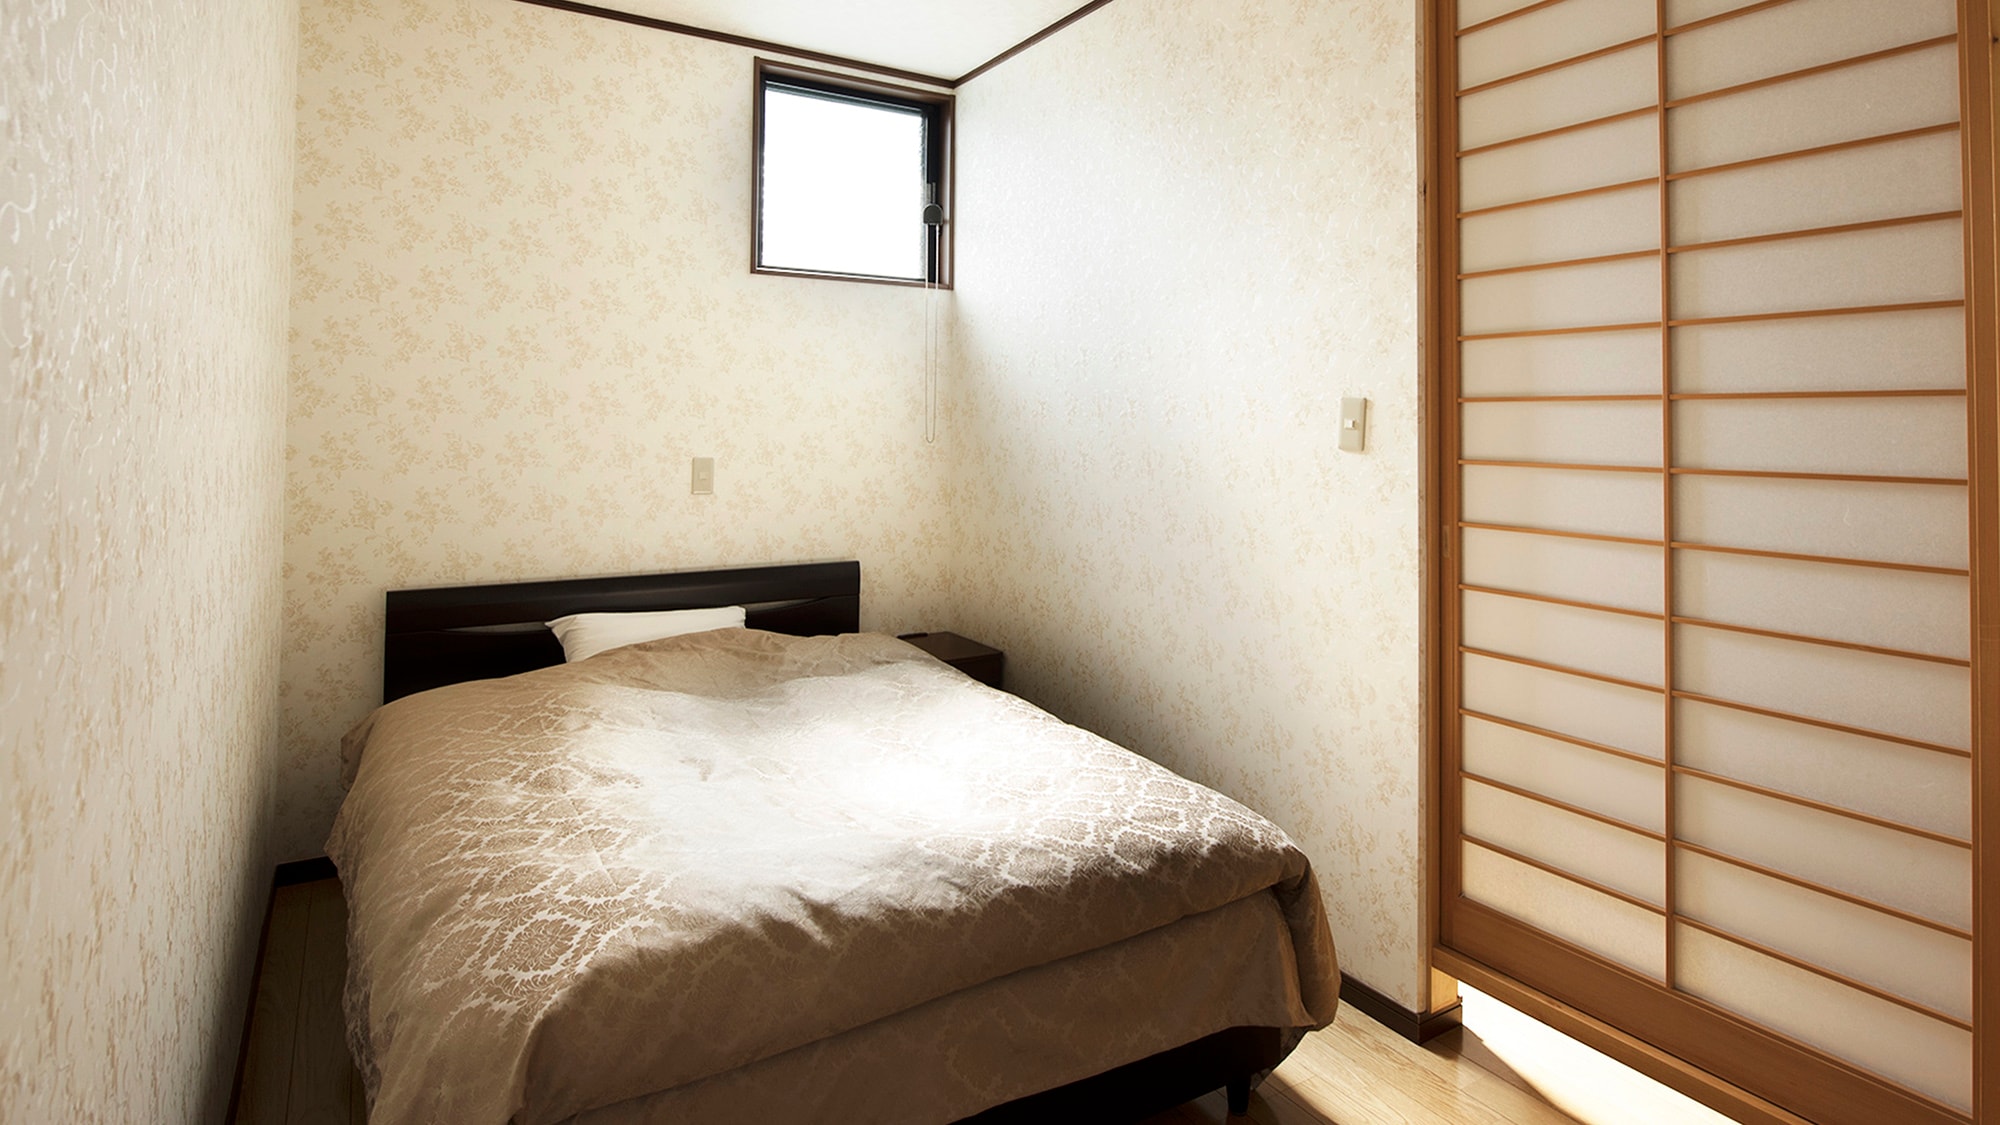 ・ "Sakura" room: There is also a bedroom